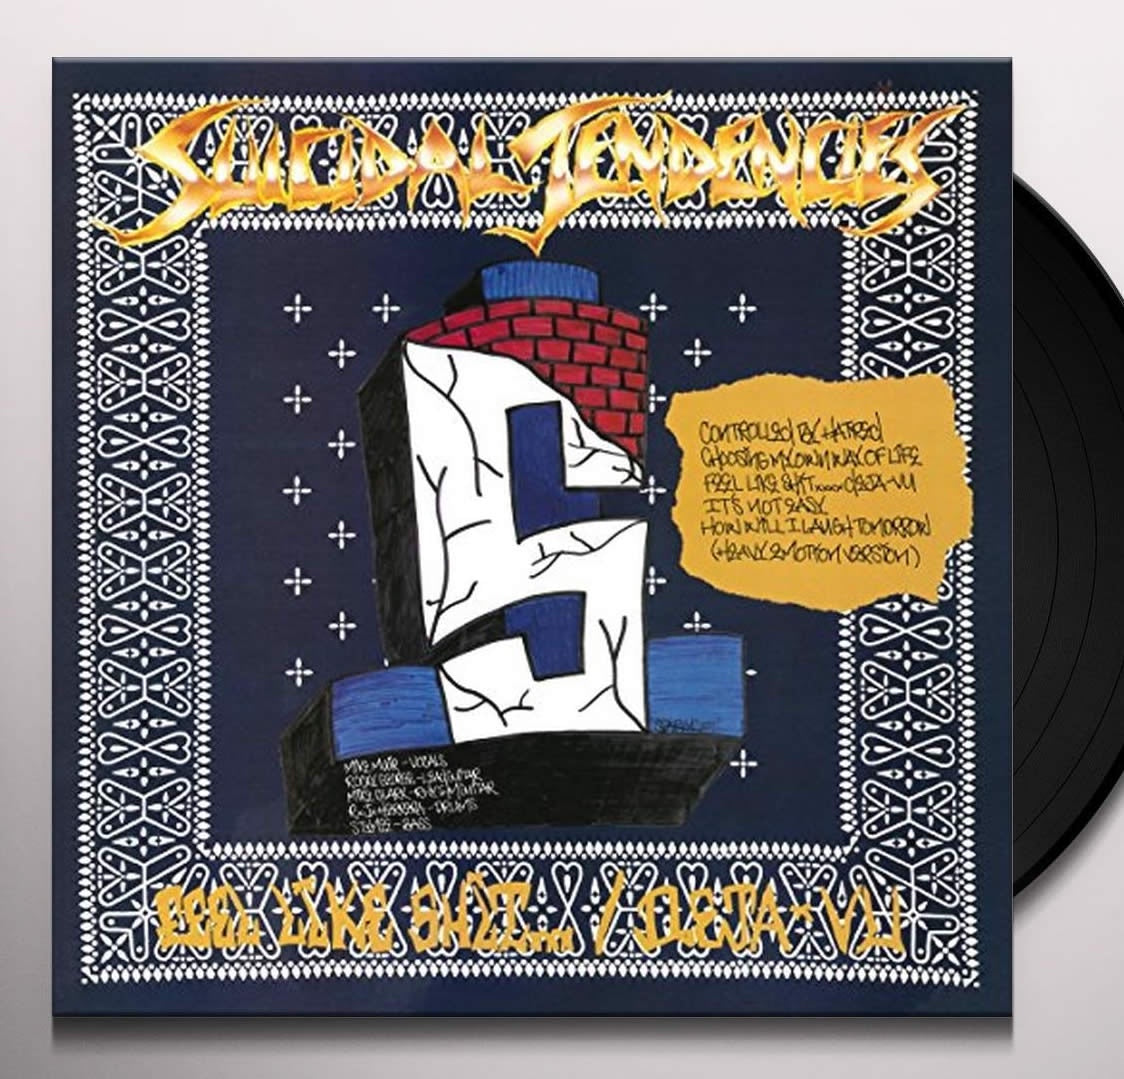 NEW - Suicidal Tendencies, Controlled By Hatred/Feel Like  Shit LP